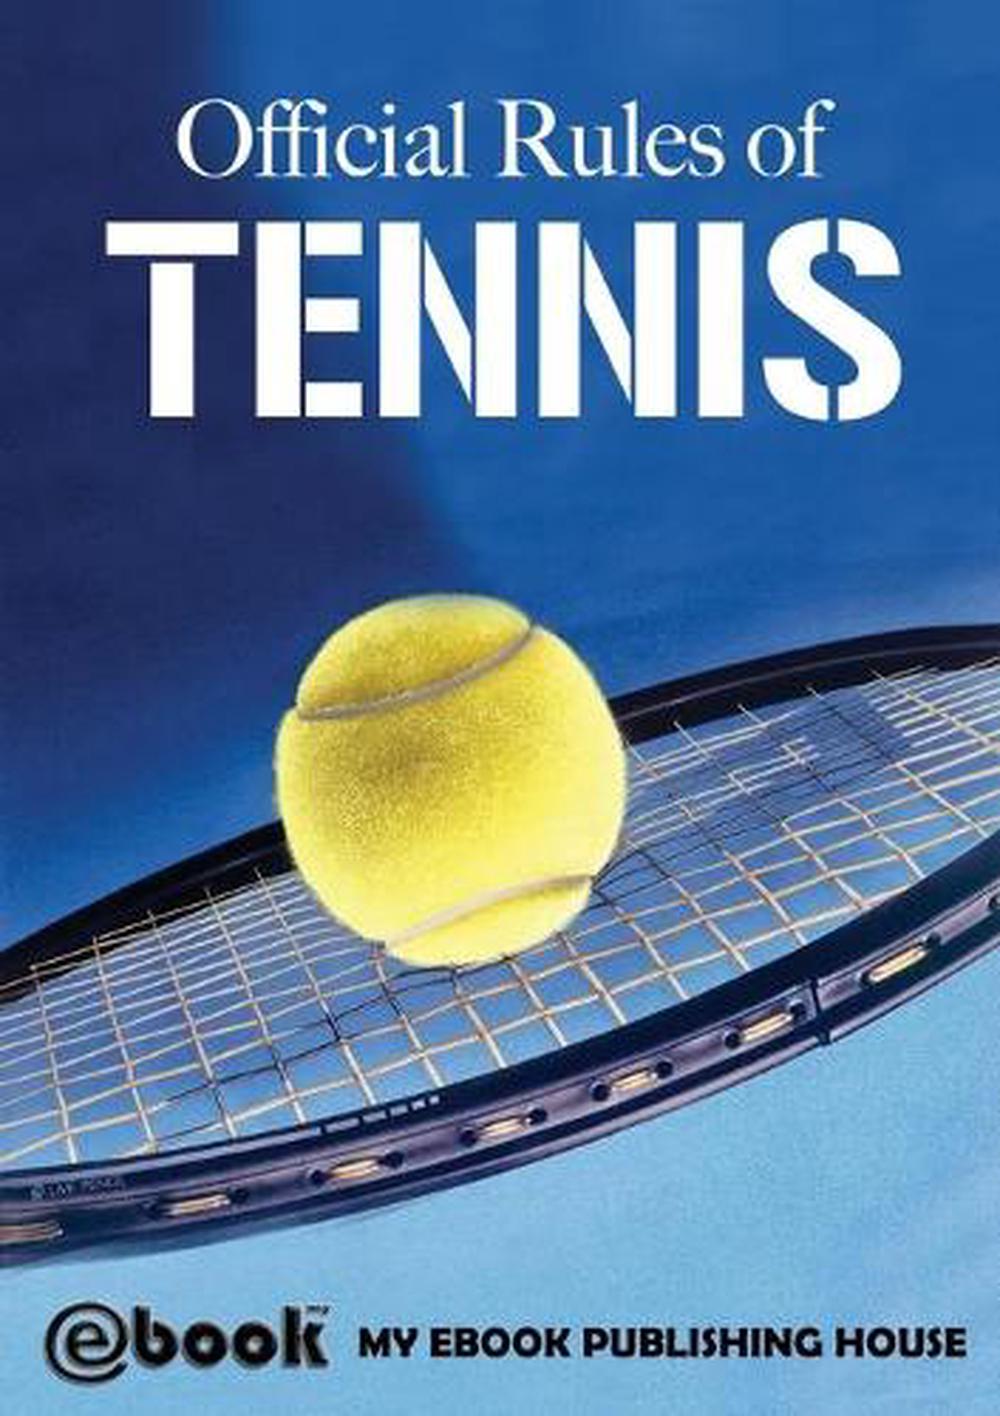 Official Rules of Tennis by My Ebook Publishing House (English